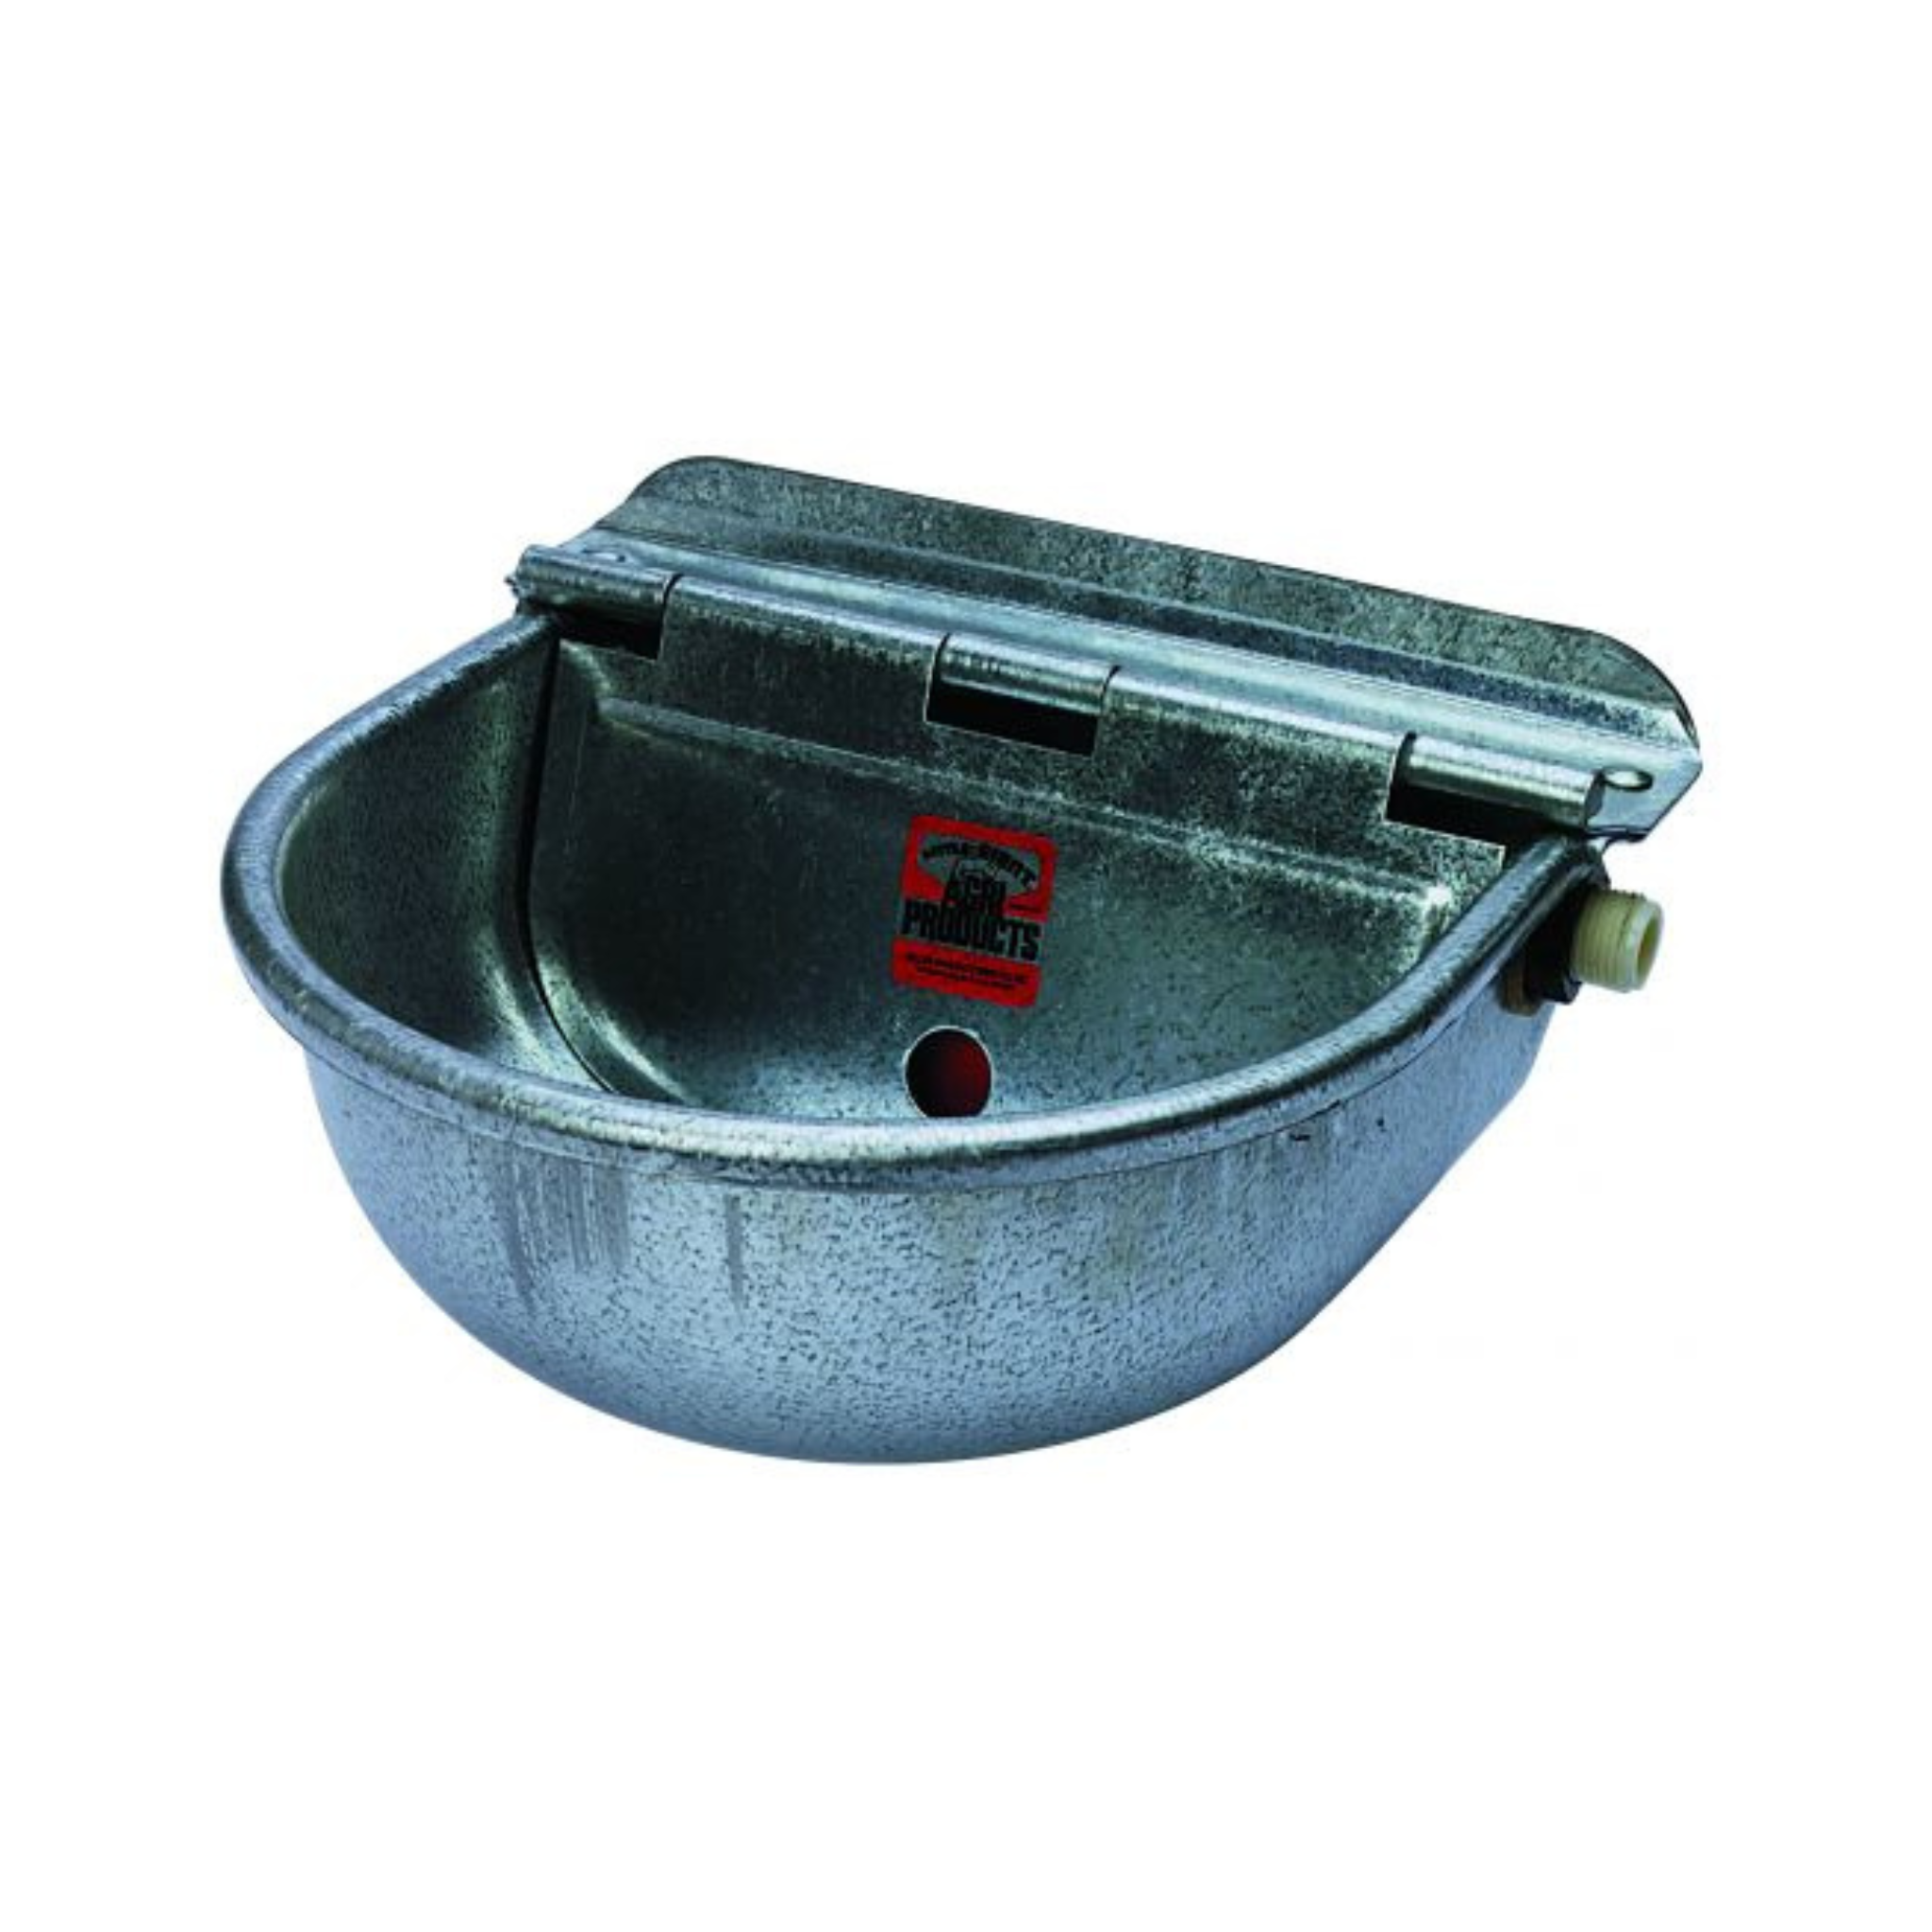 Galvanized Steel Automatic Stock Waterer